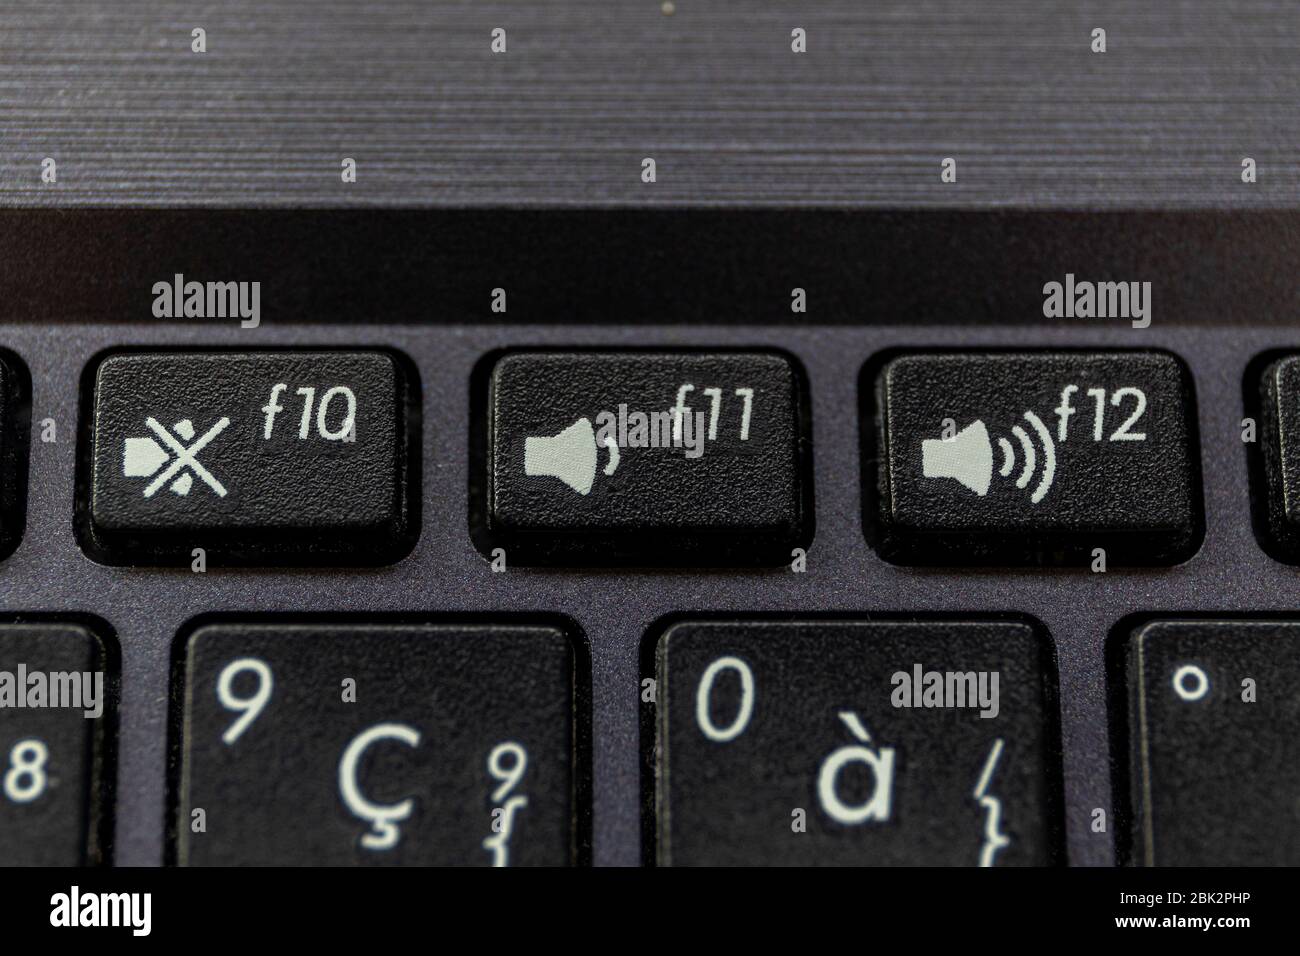 A close up portrait of the mute, volume up and volume down buttons on a laptop keyboard. The physical keys are black with a white icon on them to disp Stock Photo